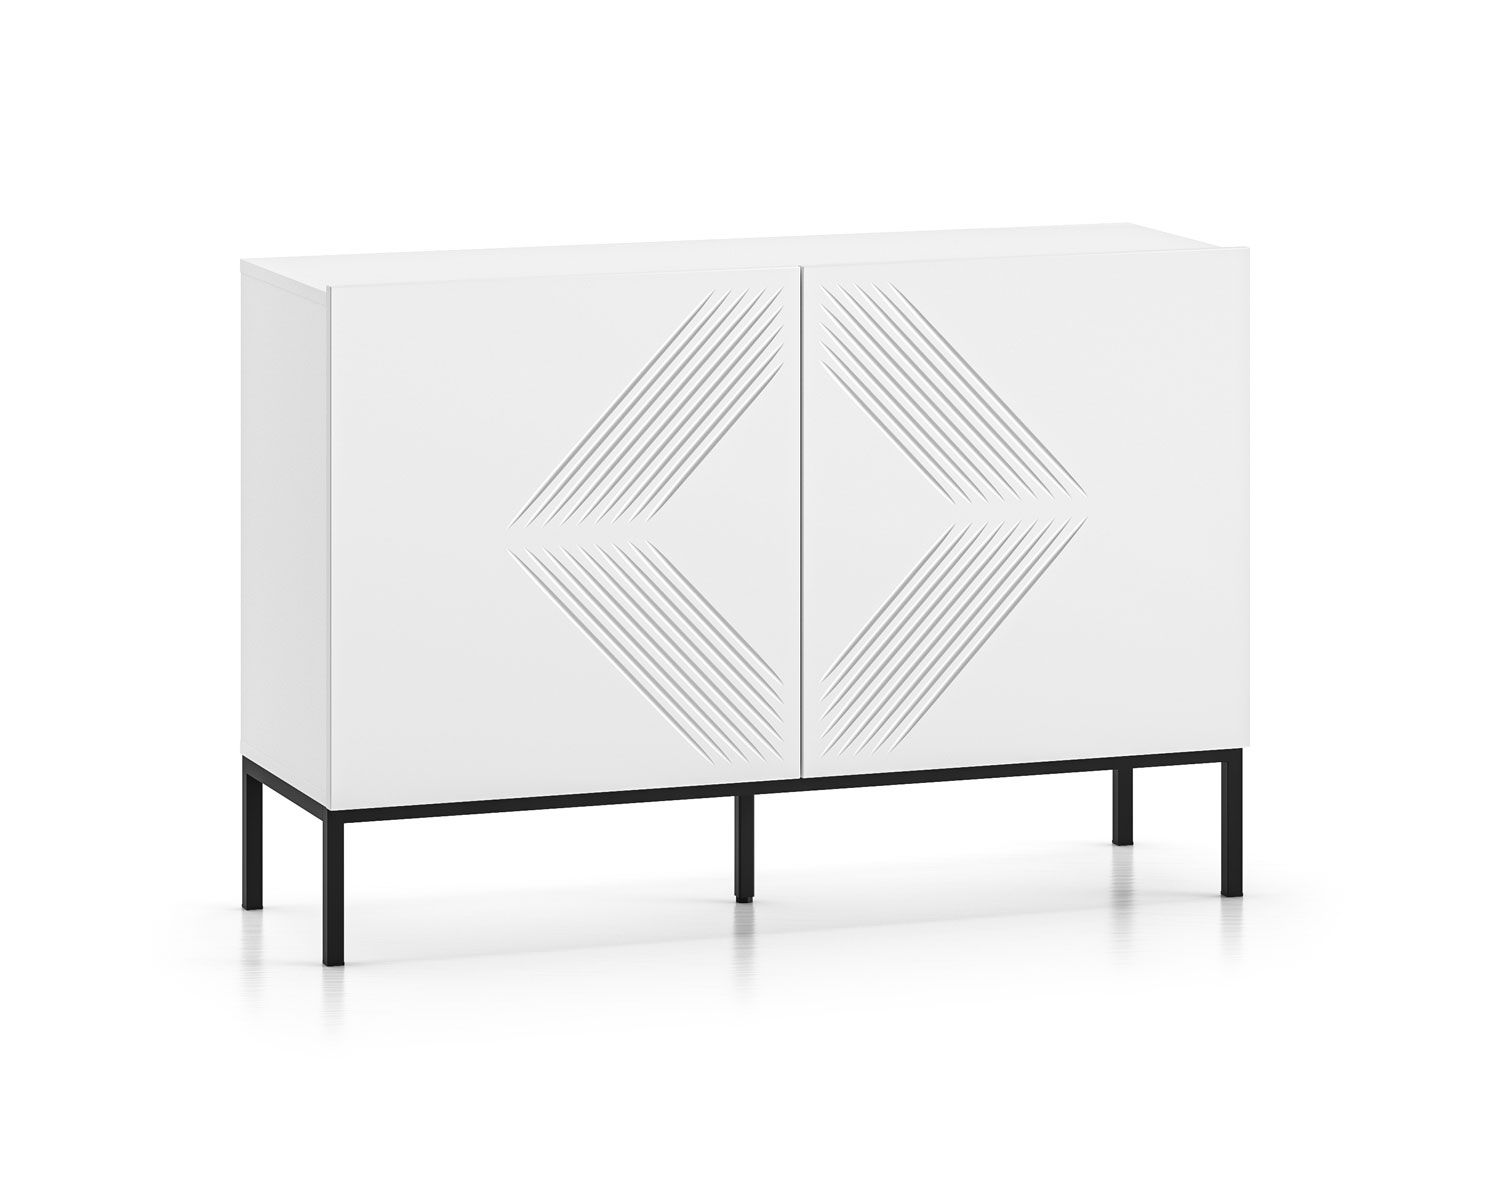 Narrow chest of drawers with four compartments Taos 11, very robust, color: white matt, legs: black, dimensions: 77 x 114 x 37 cm, ideal for combining, for living room 